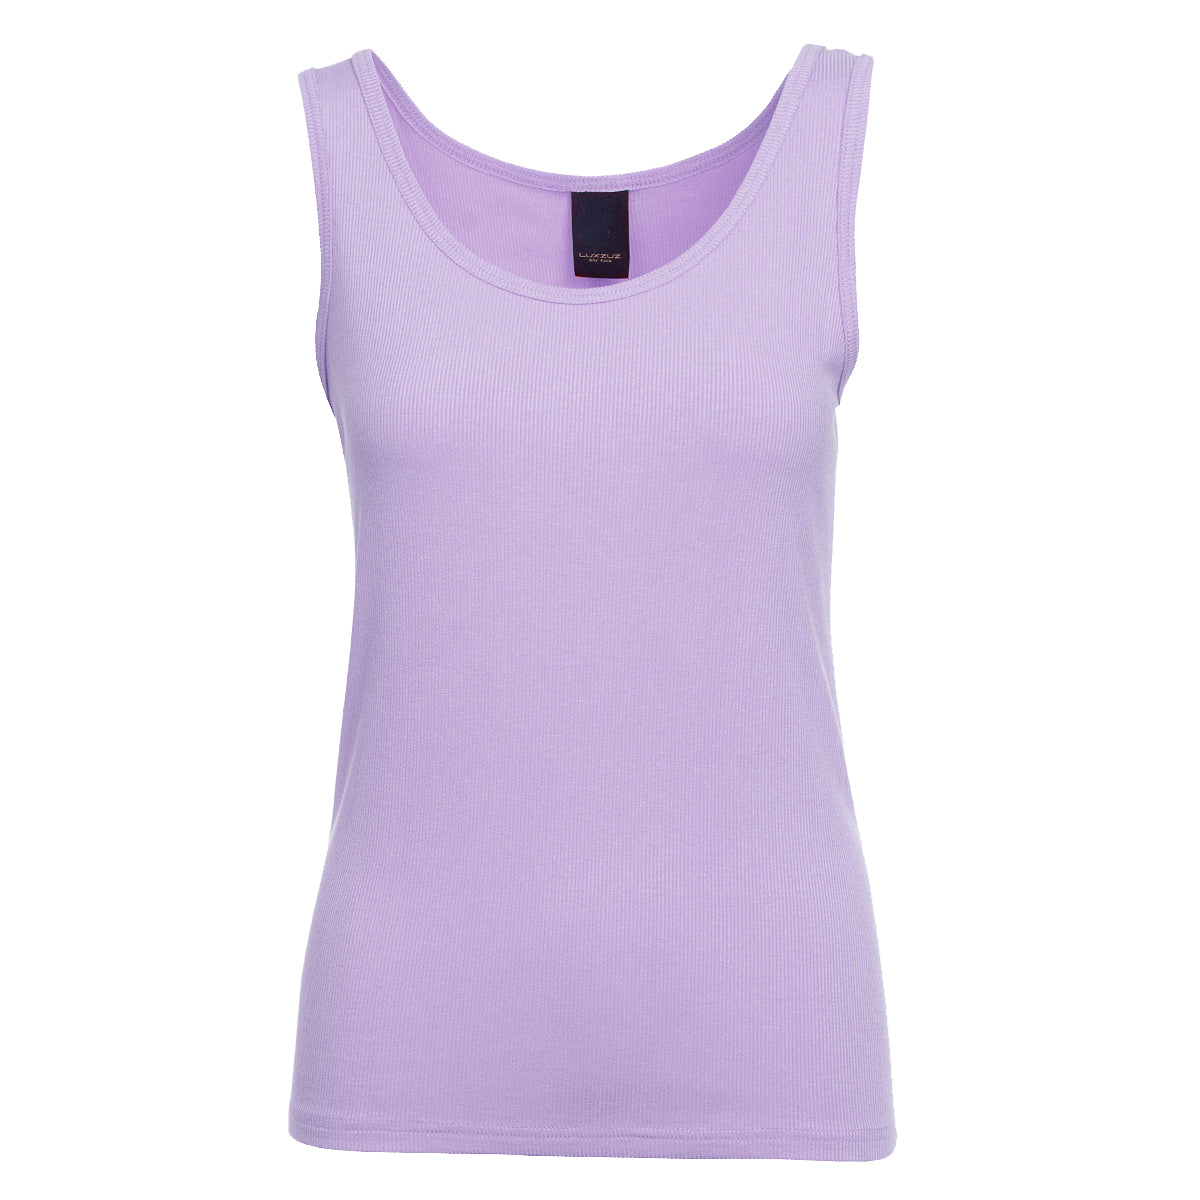 LUXZUZ // ONE TWO Adelina Top Top 407 Lilacs Bloom